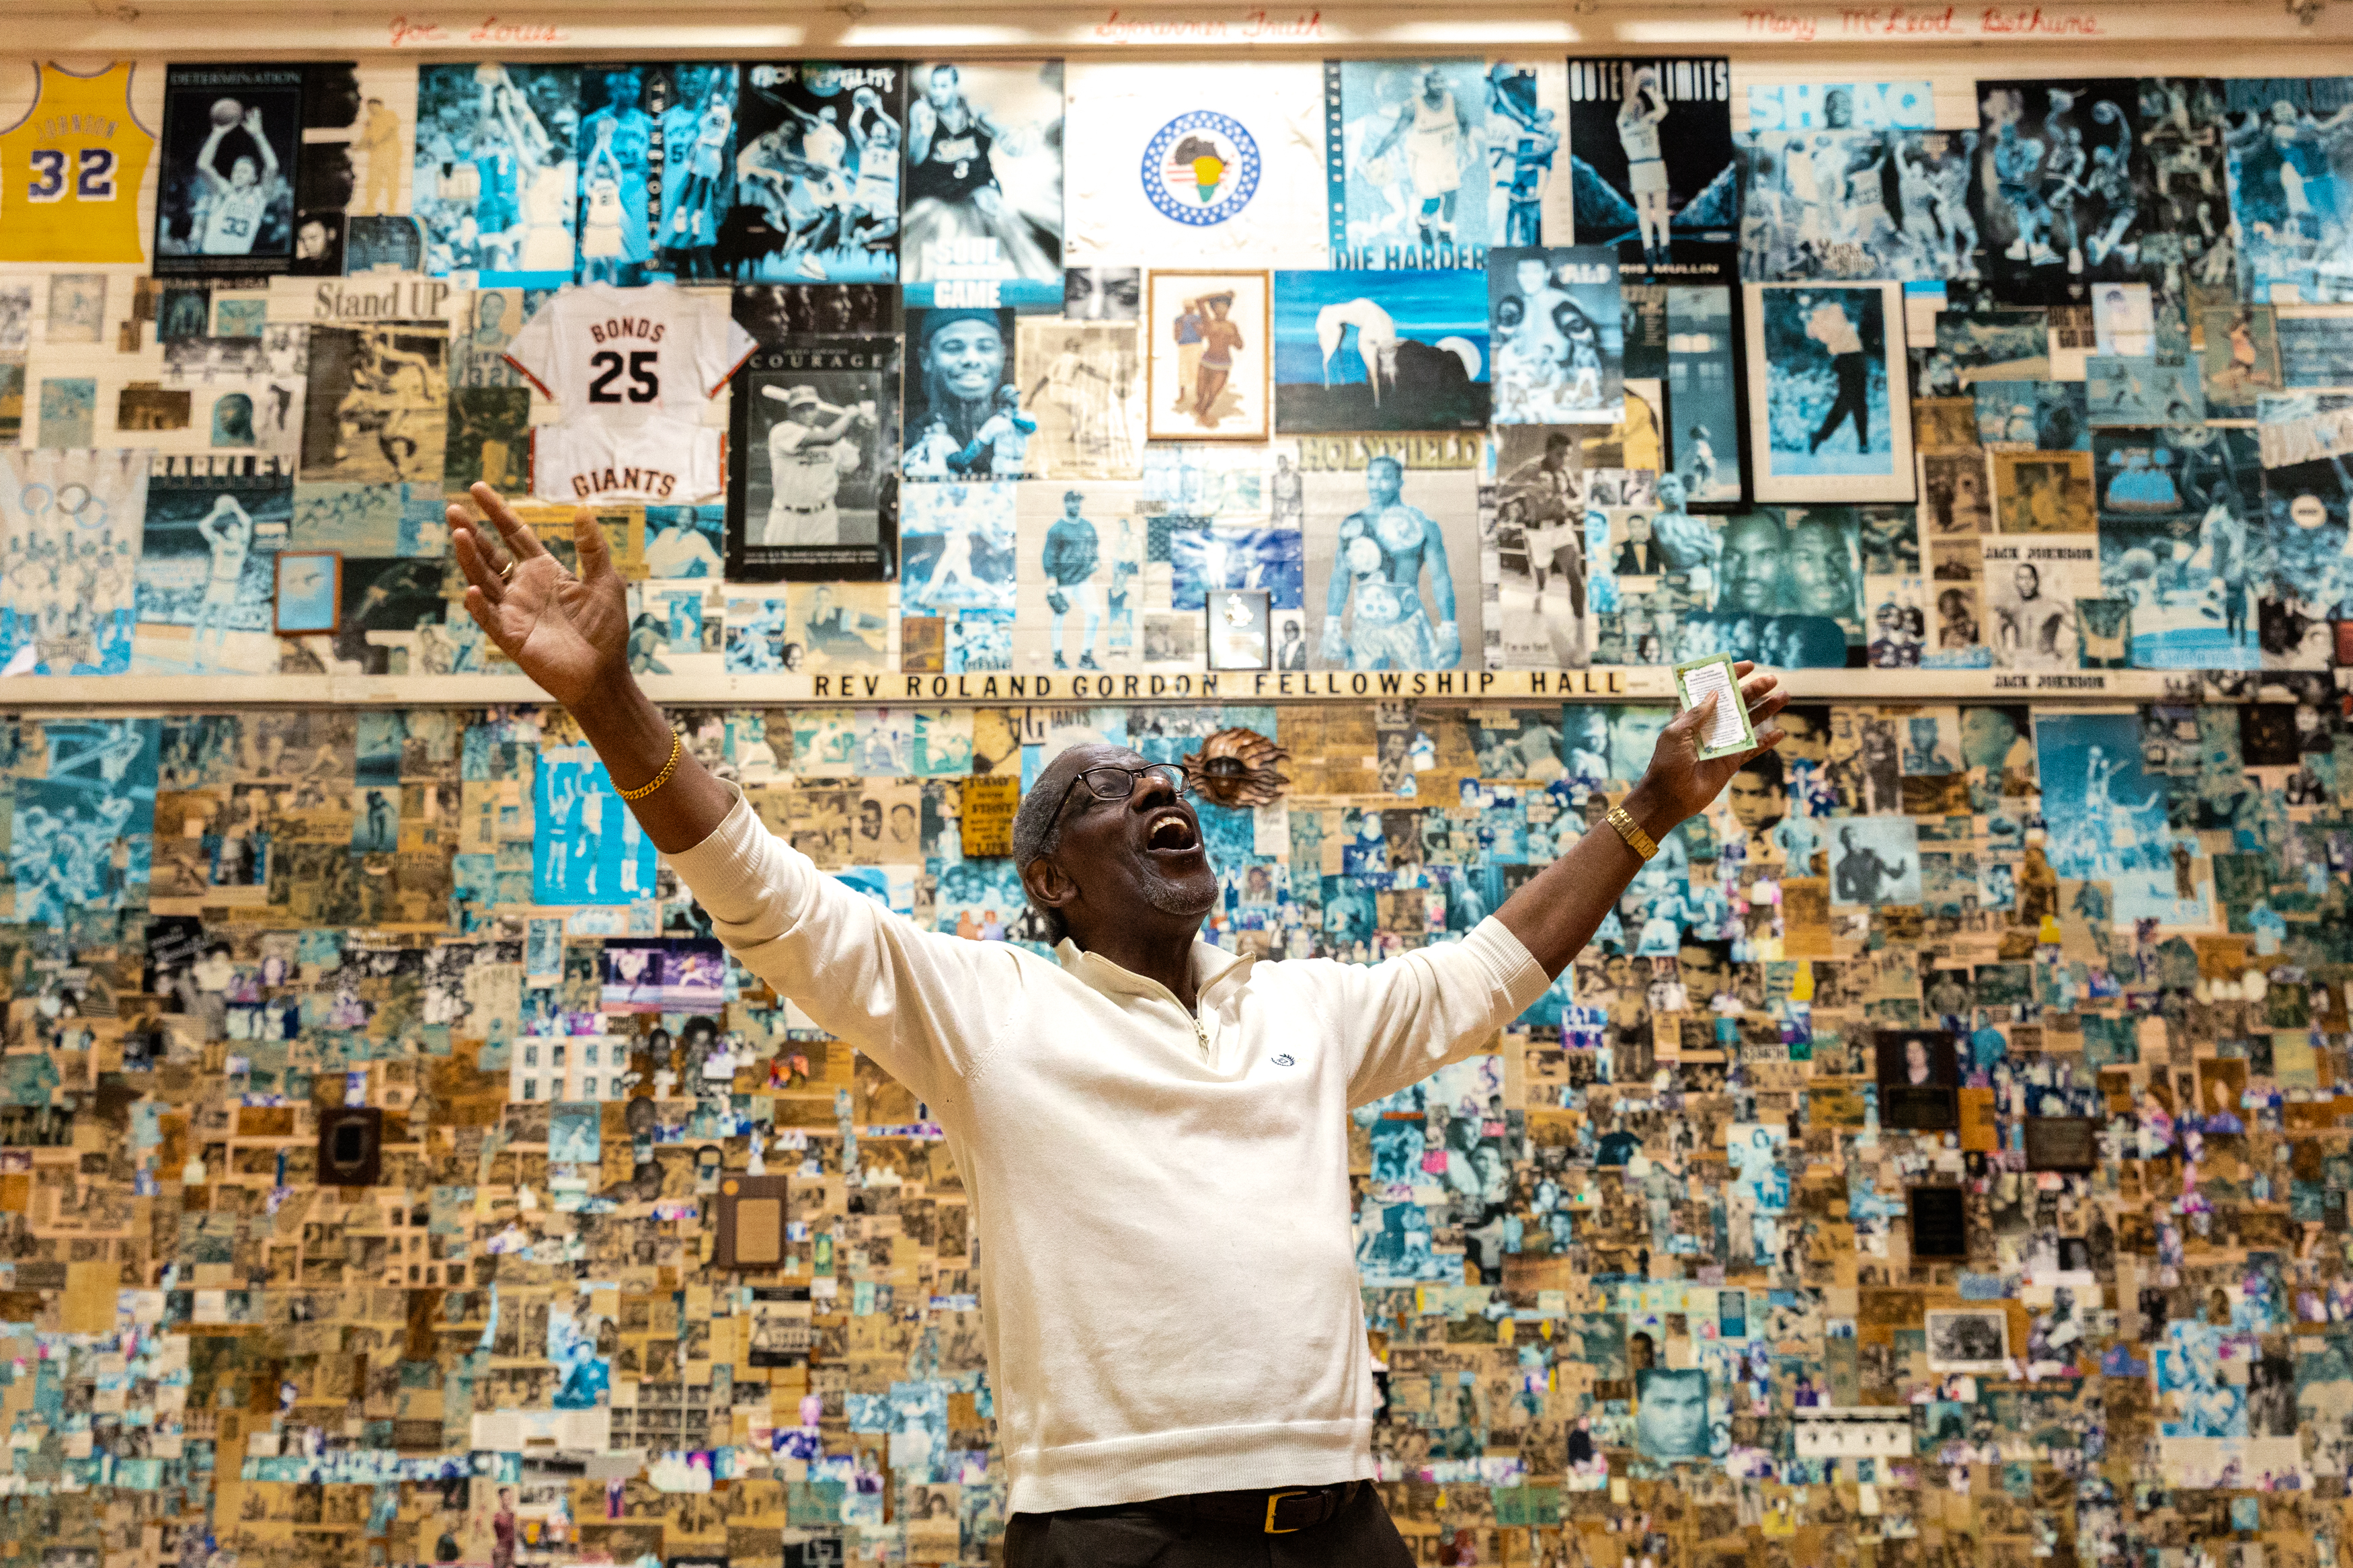 A joyful man raises his arms in a room covered with numerous historical photos and memorabilia.